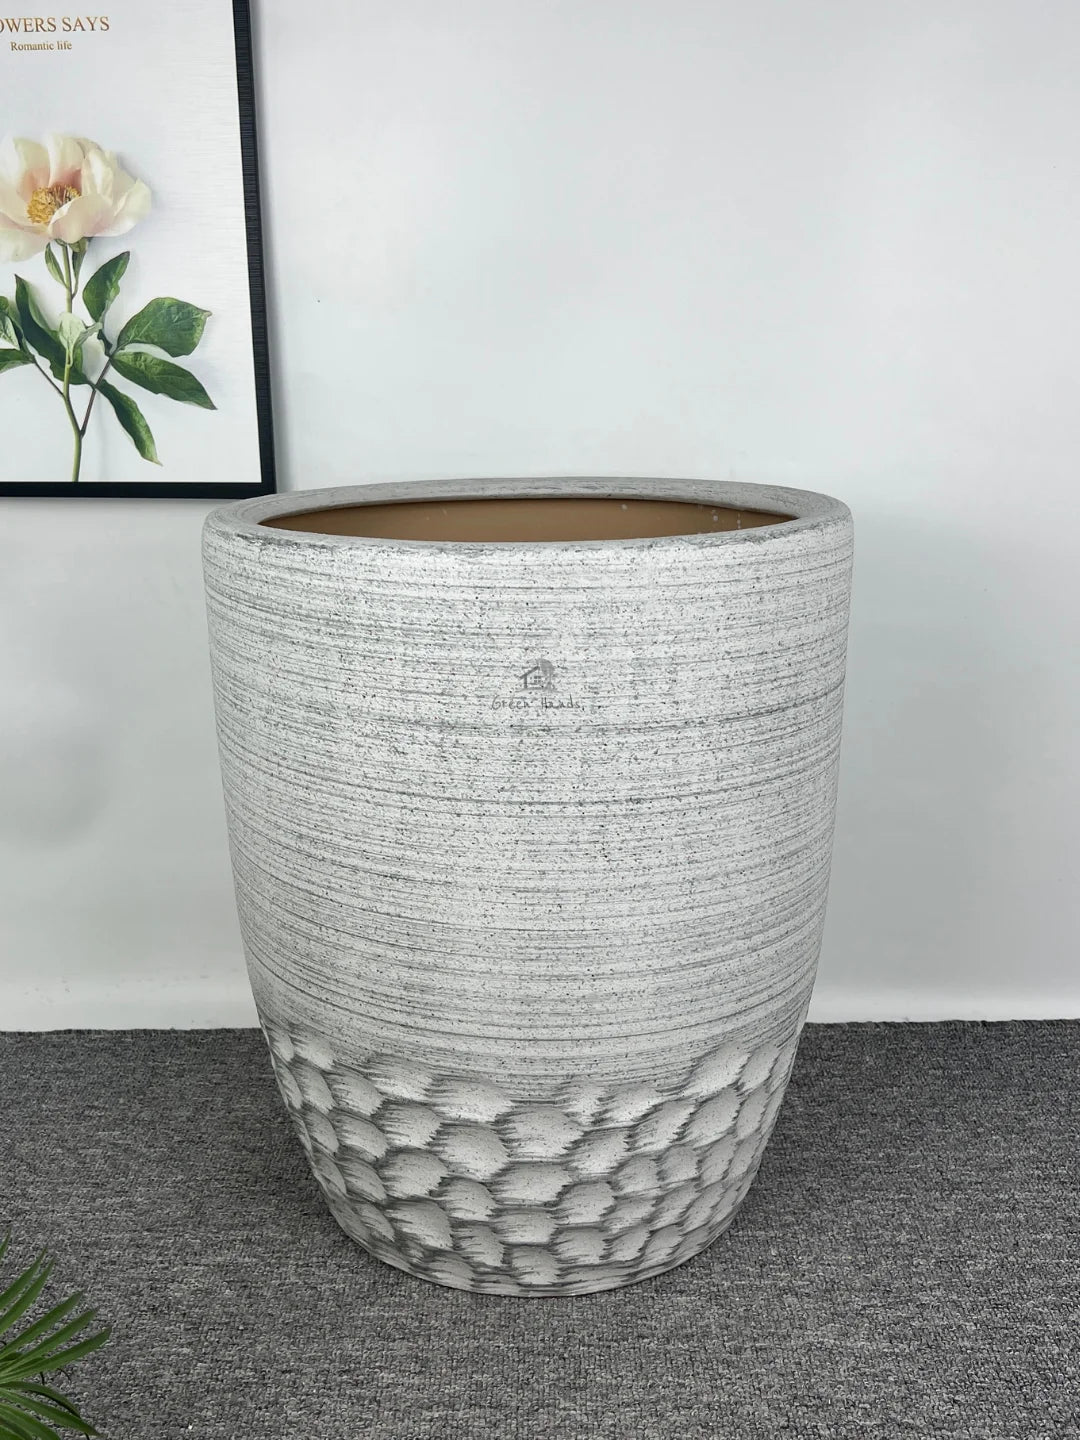 Modern Tall Ceramic Grey Honey Comb Pots: Elegance and Functionality Combined XL